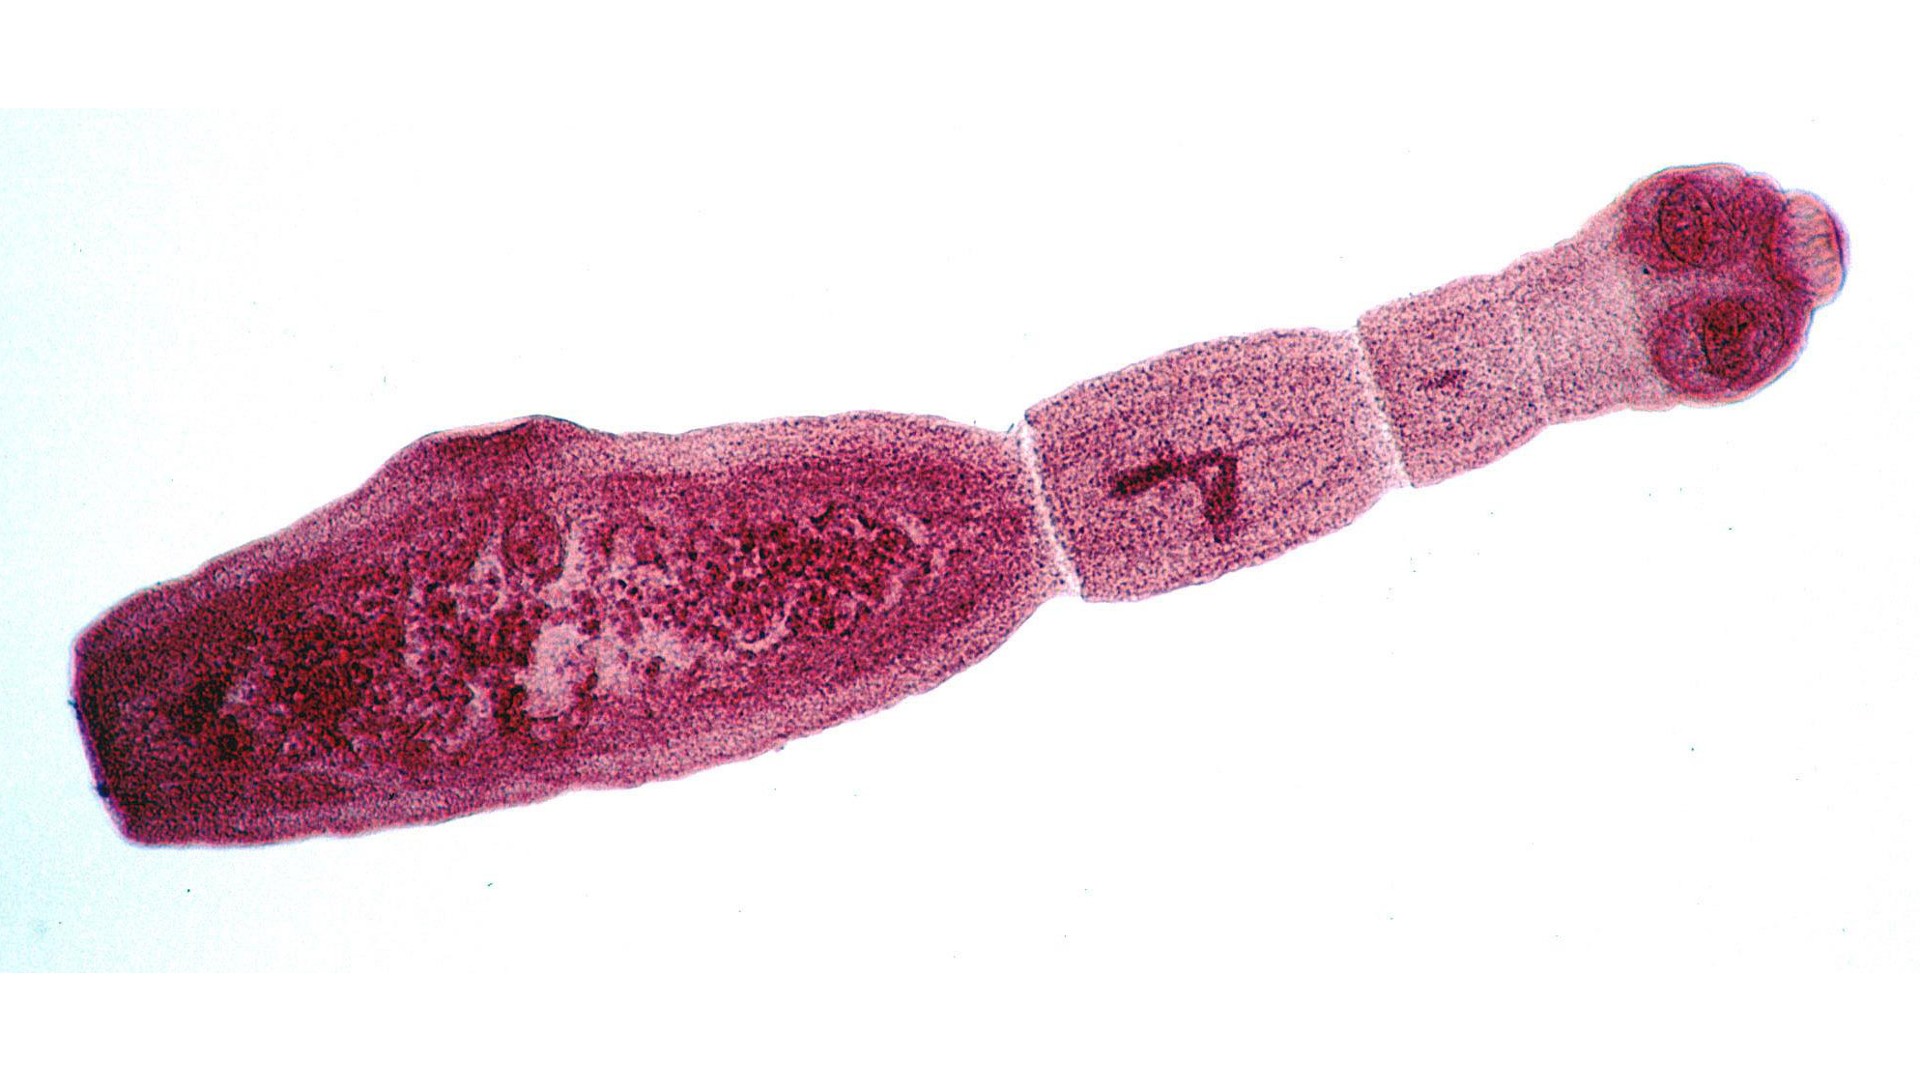 A photo of a tapeworm known as Echinococcus granulosus, which causes echinococcosis.